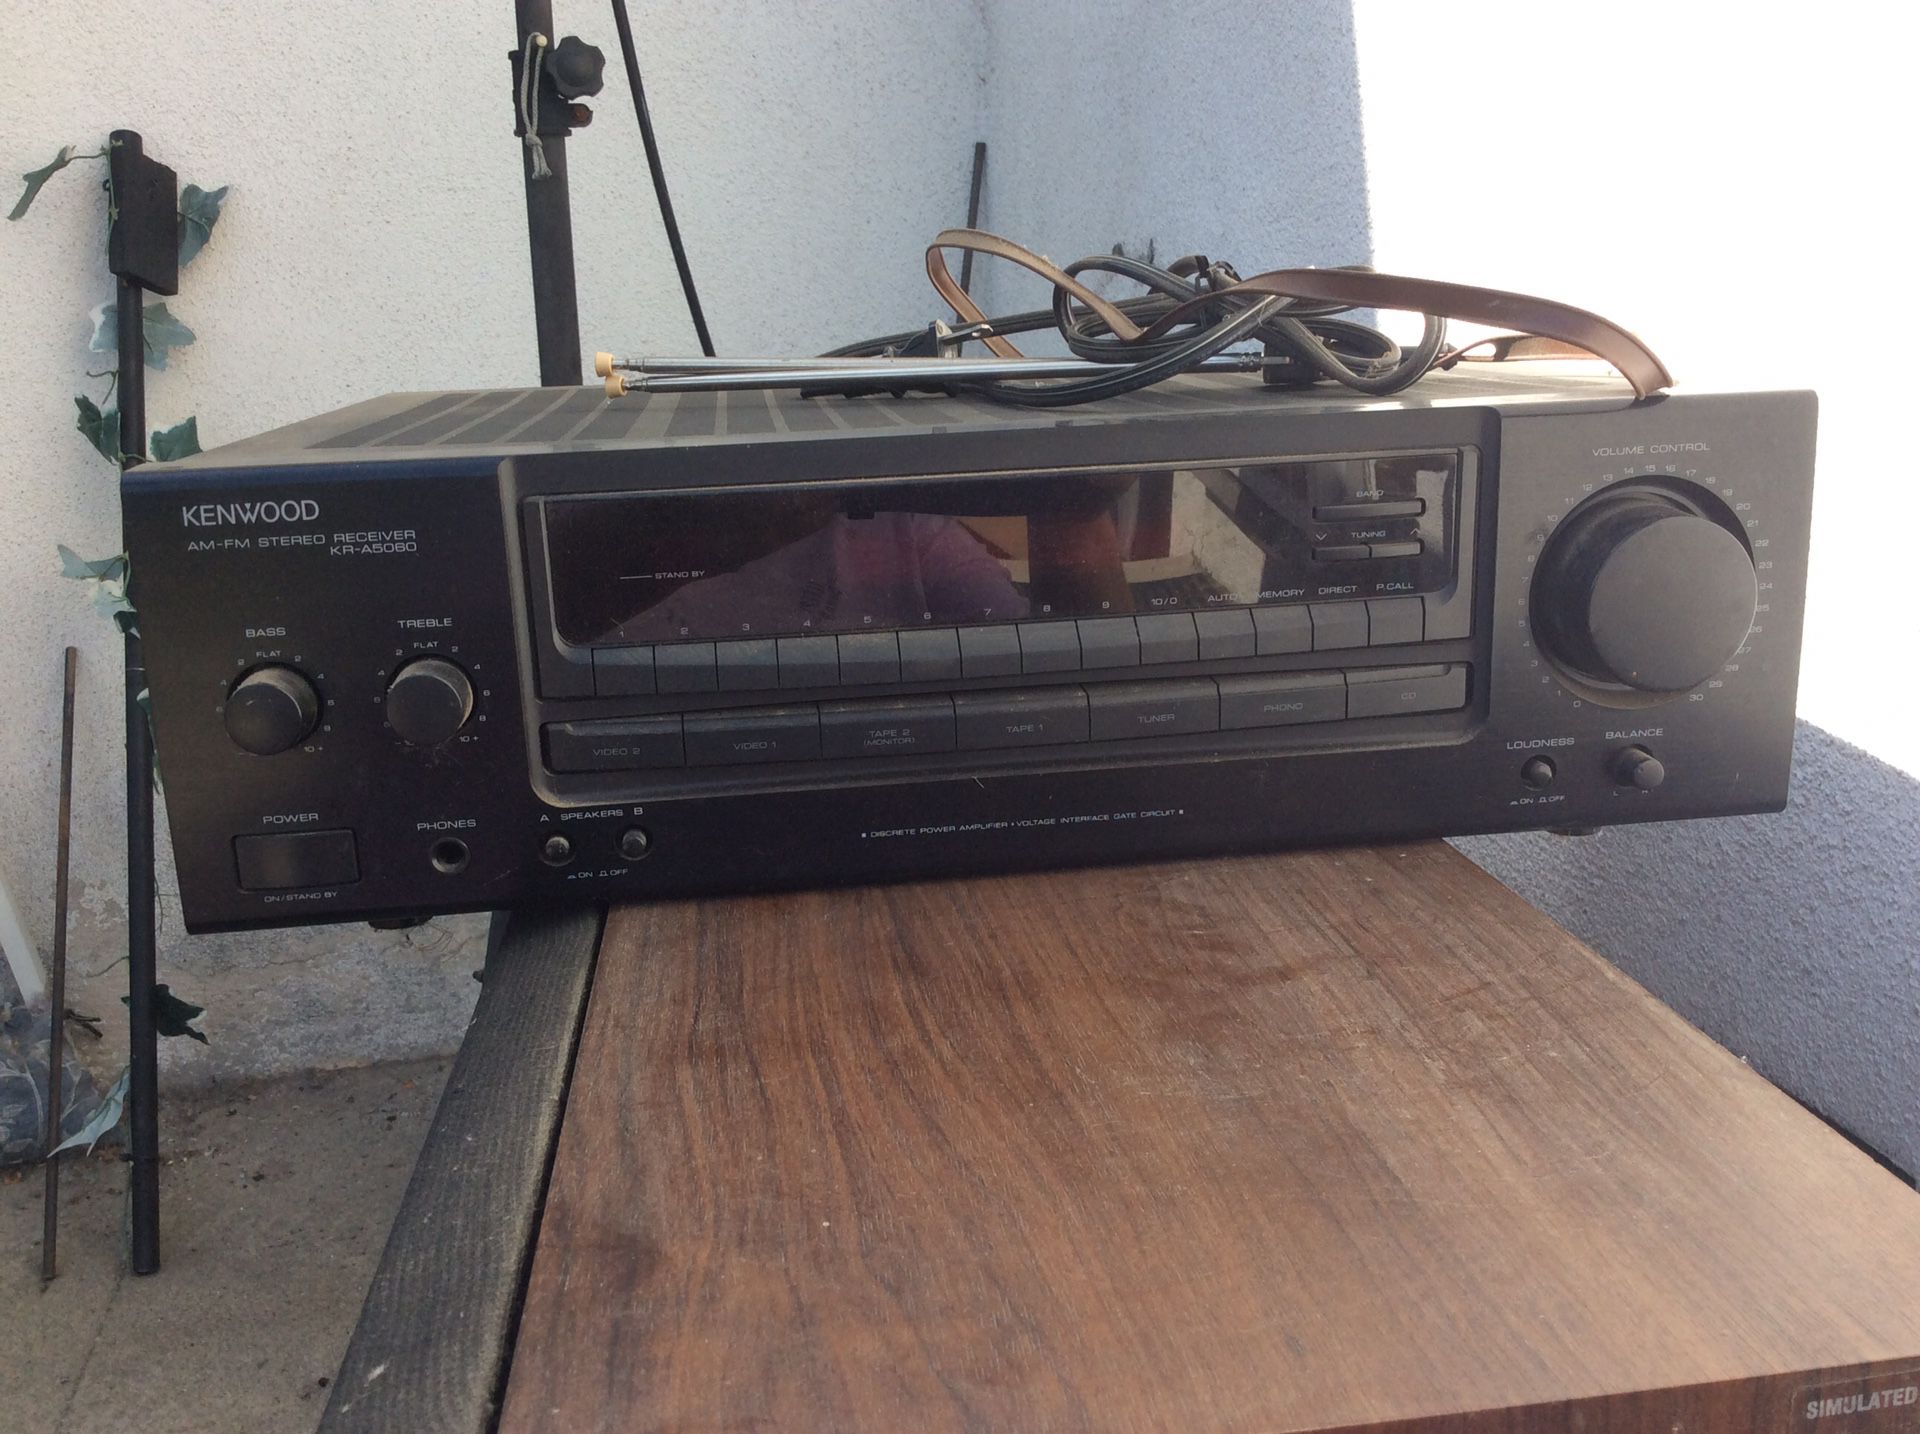 Kenwood stereo receiver with speakers